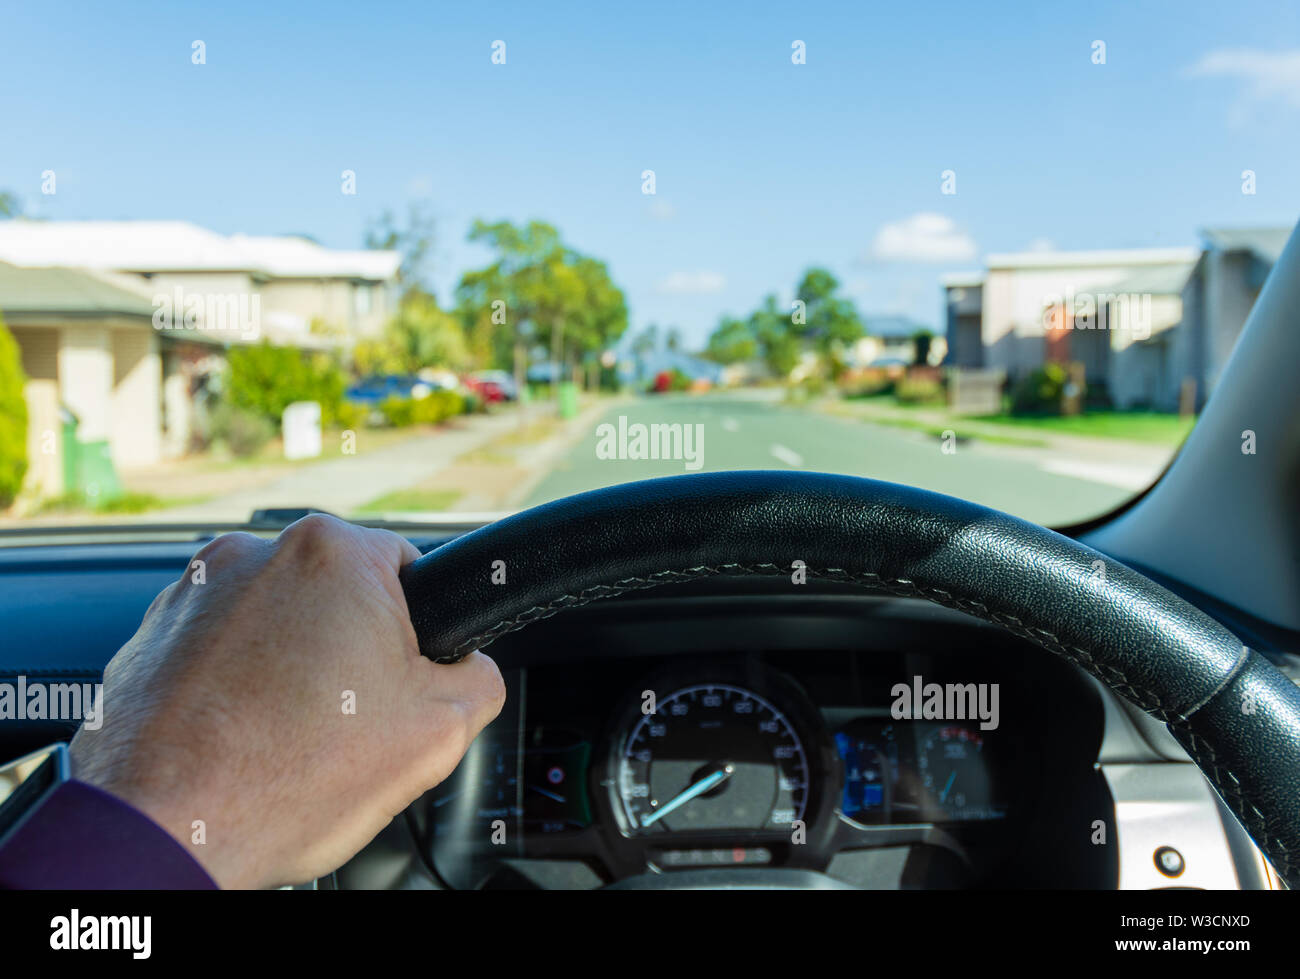 A Driver's view of Driving a car through the Suburbs of Australia Stock Photo